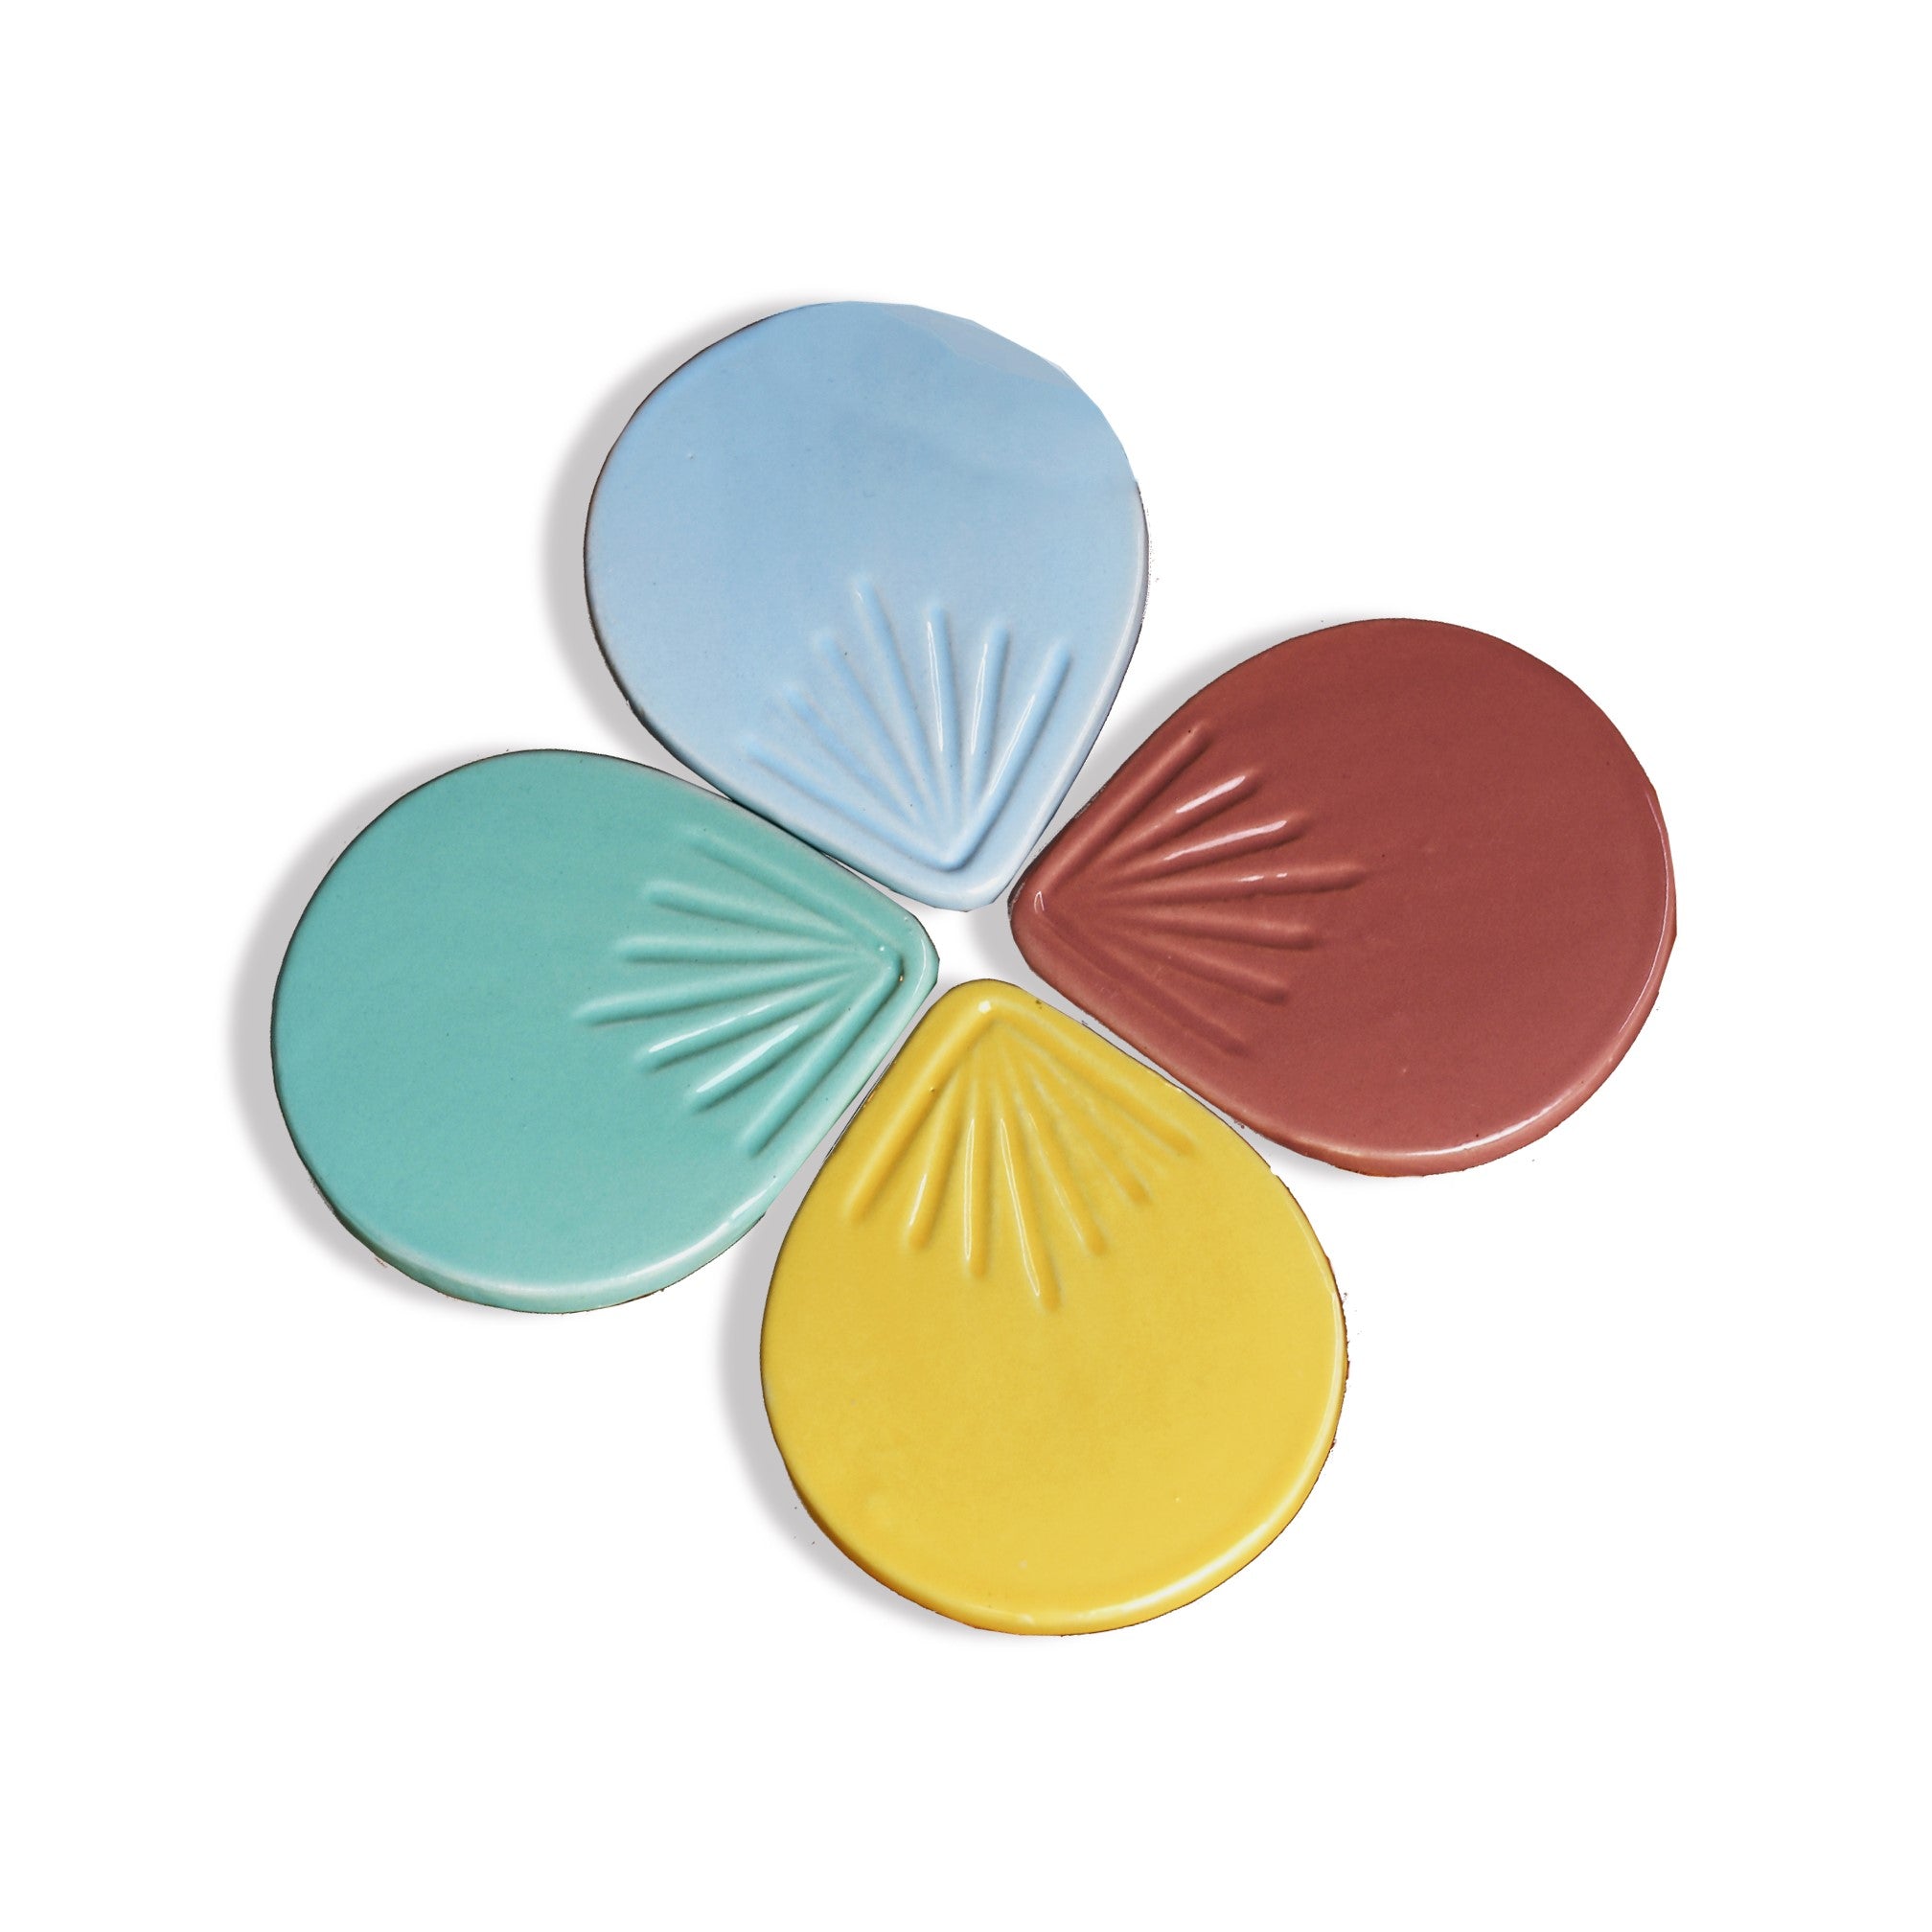 Etched Raindrop Ceramic Coasters in Glossy Pastel Colours - 